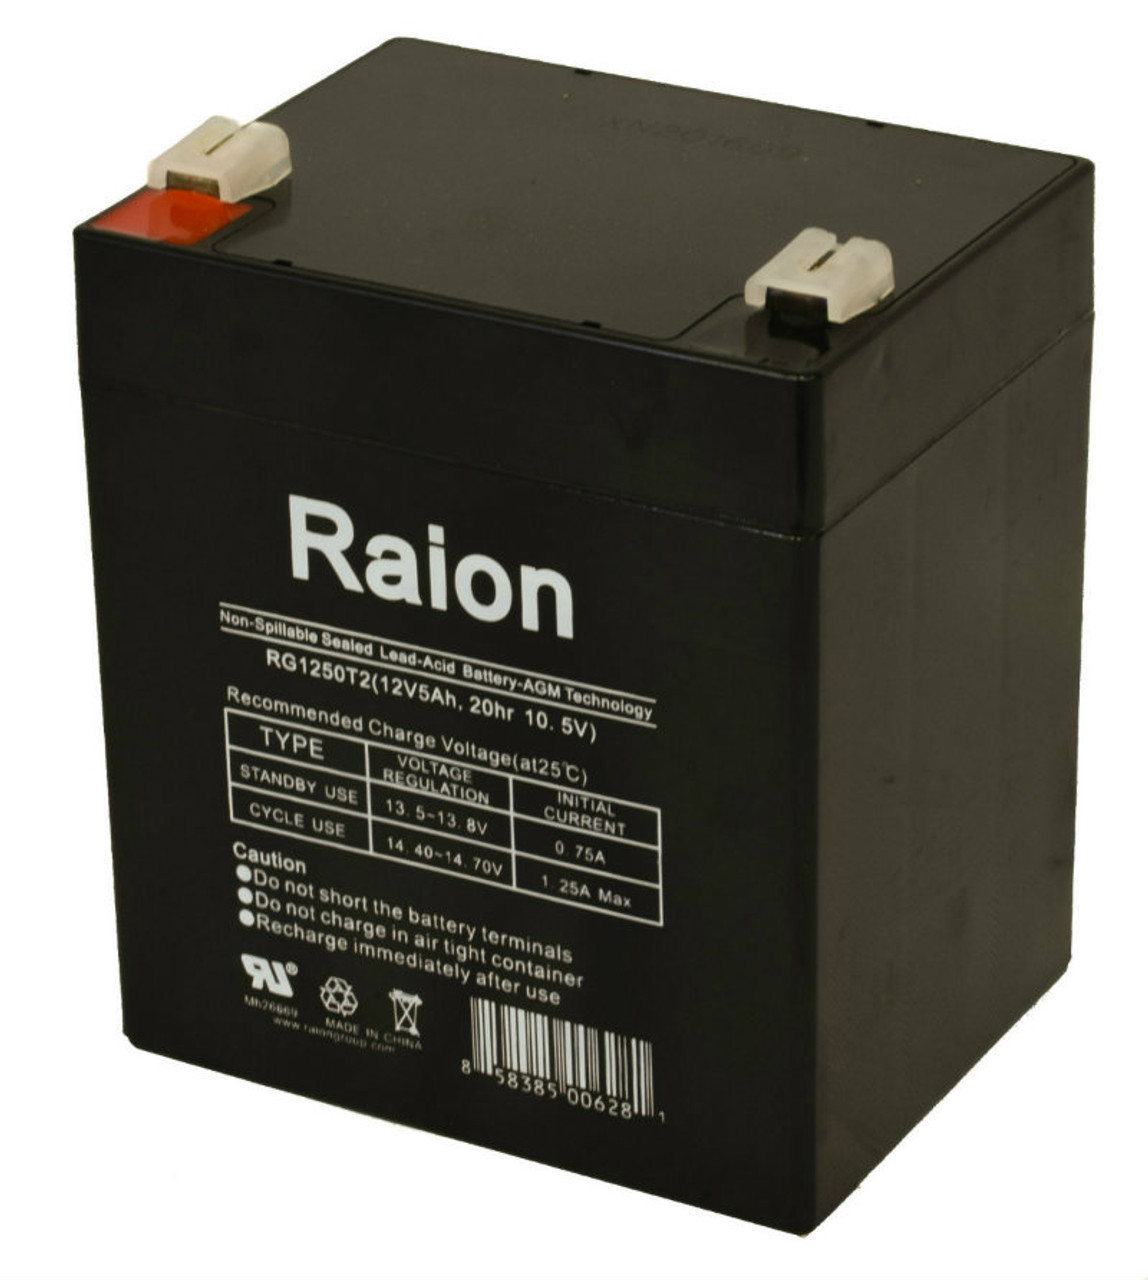 Raion Power RG1250T1 Replacement Alarm Security System Battery for Napco Alarms GEM-P816